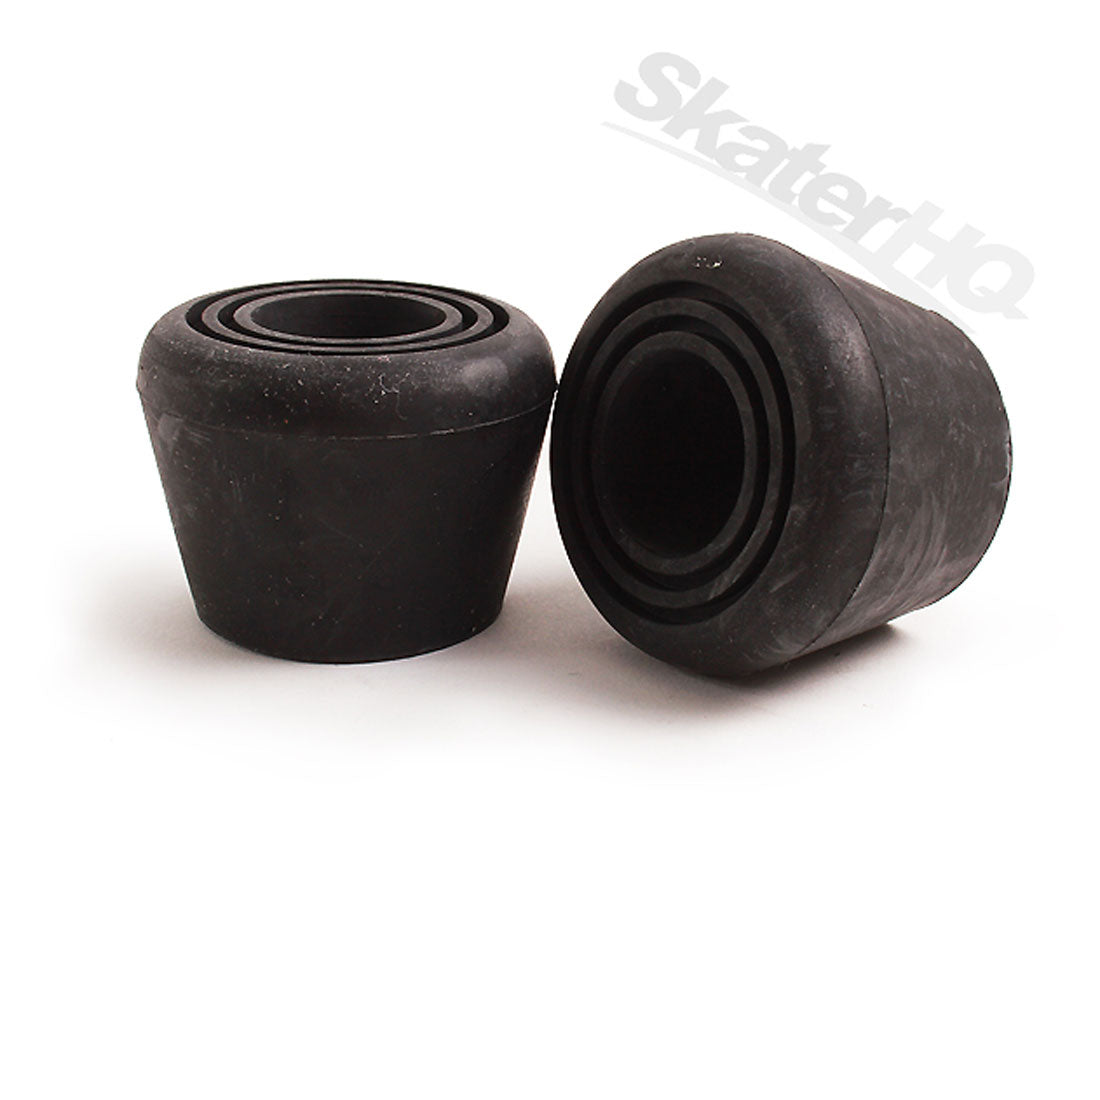 Riedell Outdoor Toe Stop Black Roller Skate Hardware and Parts